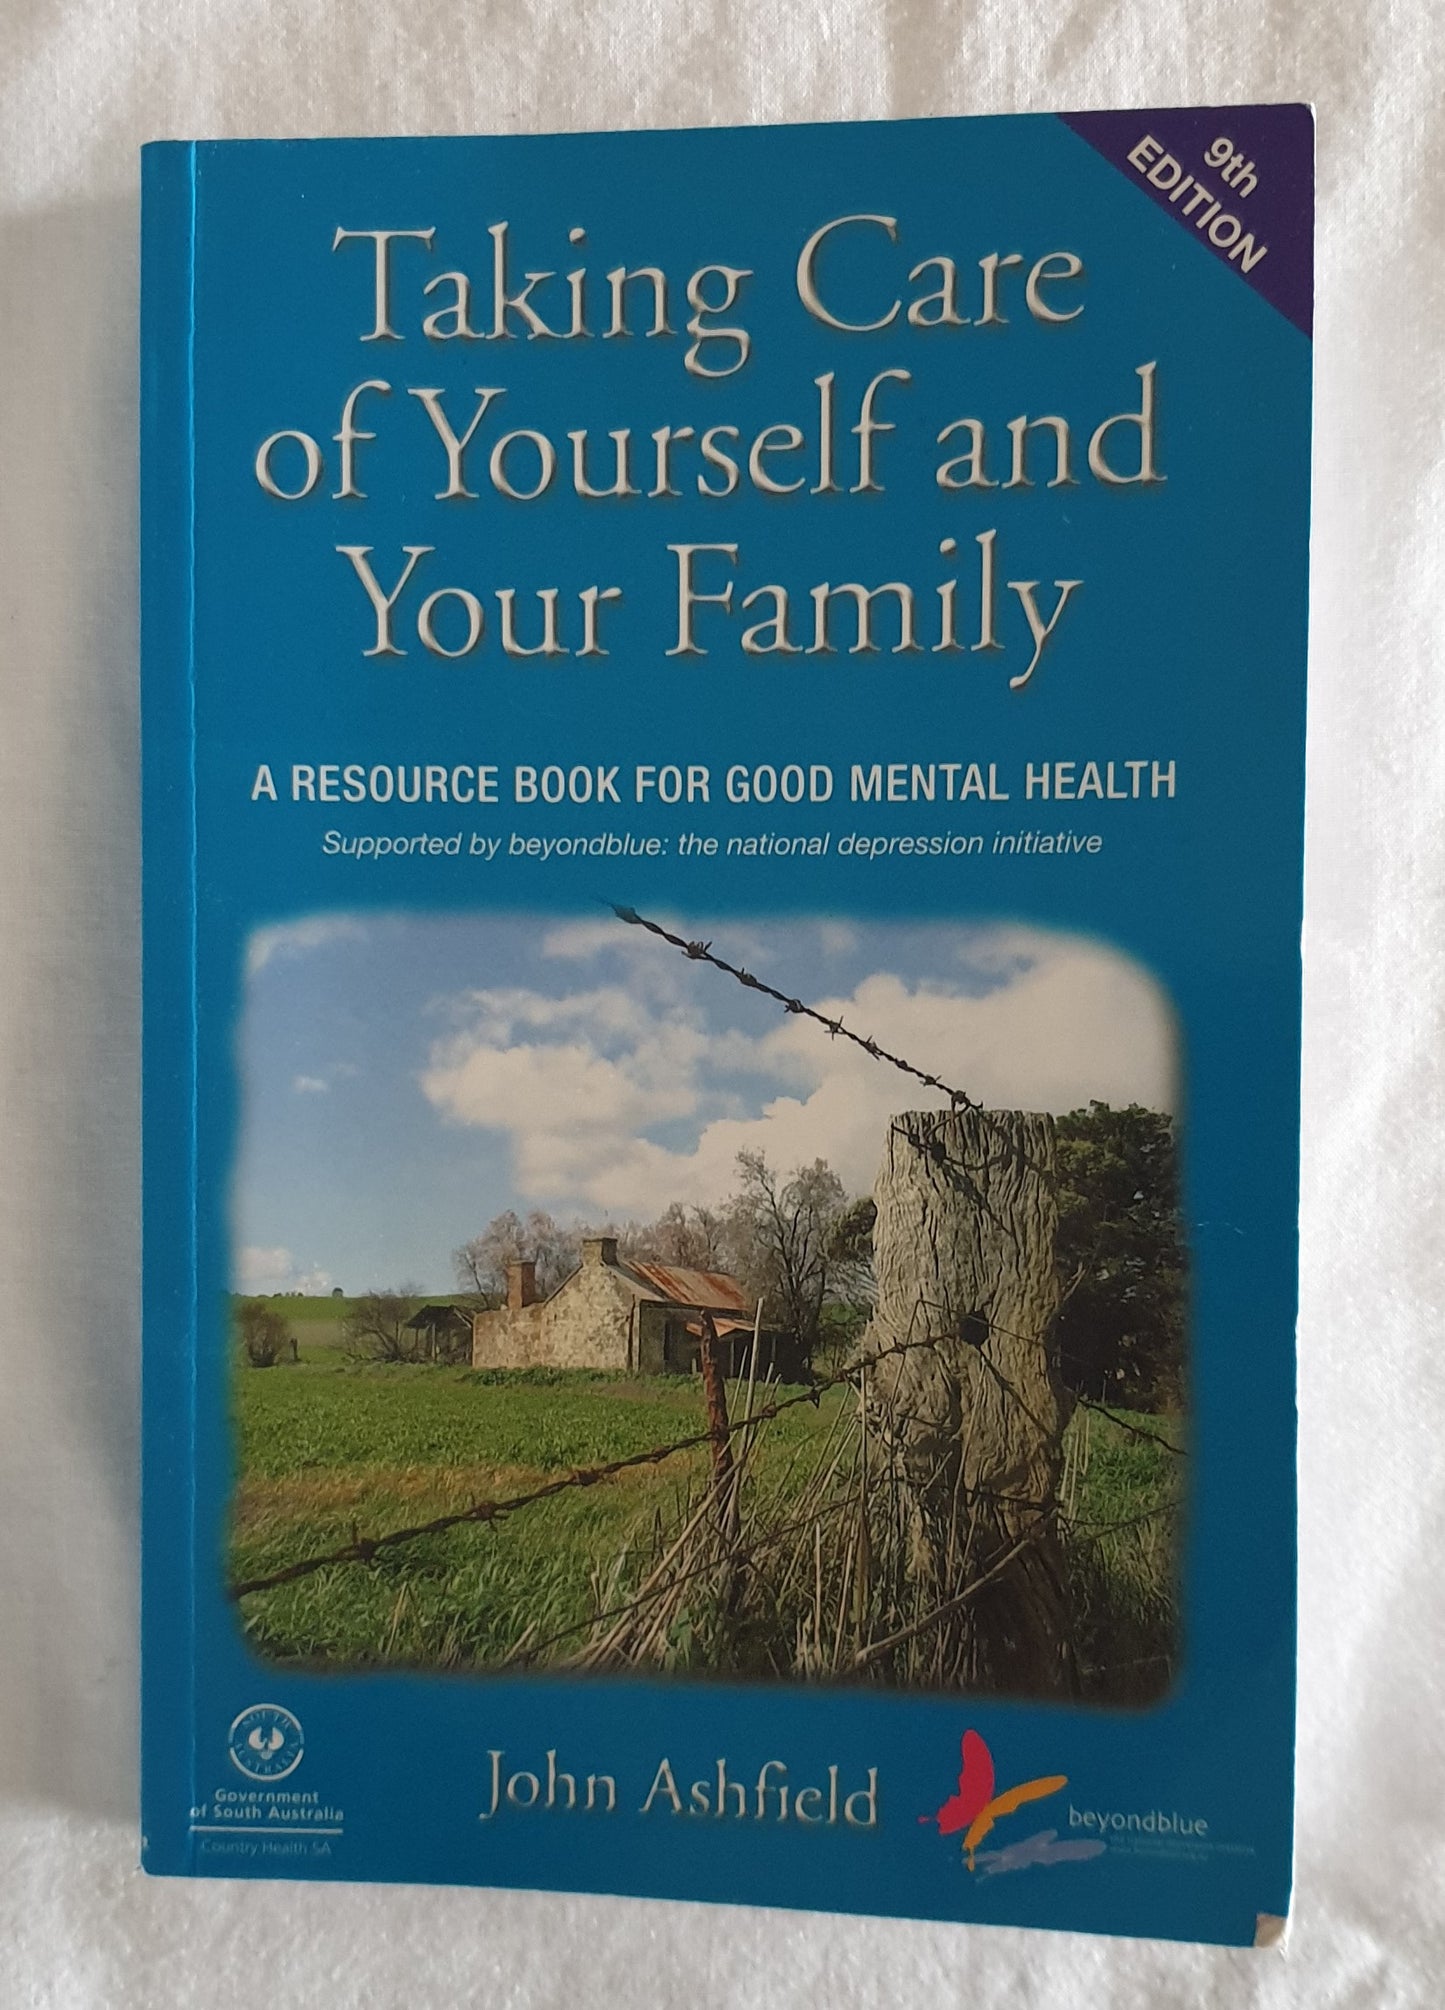 Taking Care of Yourself and Your Family by John Ashfield